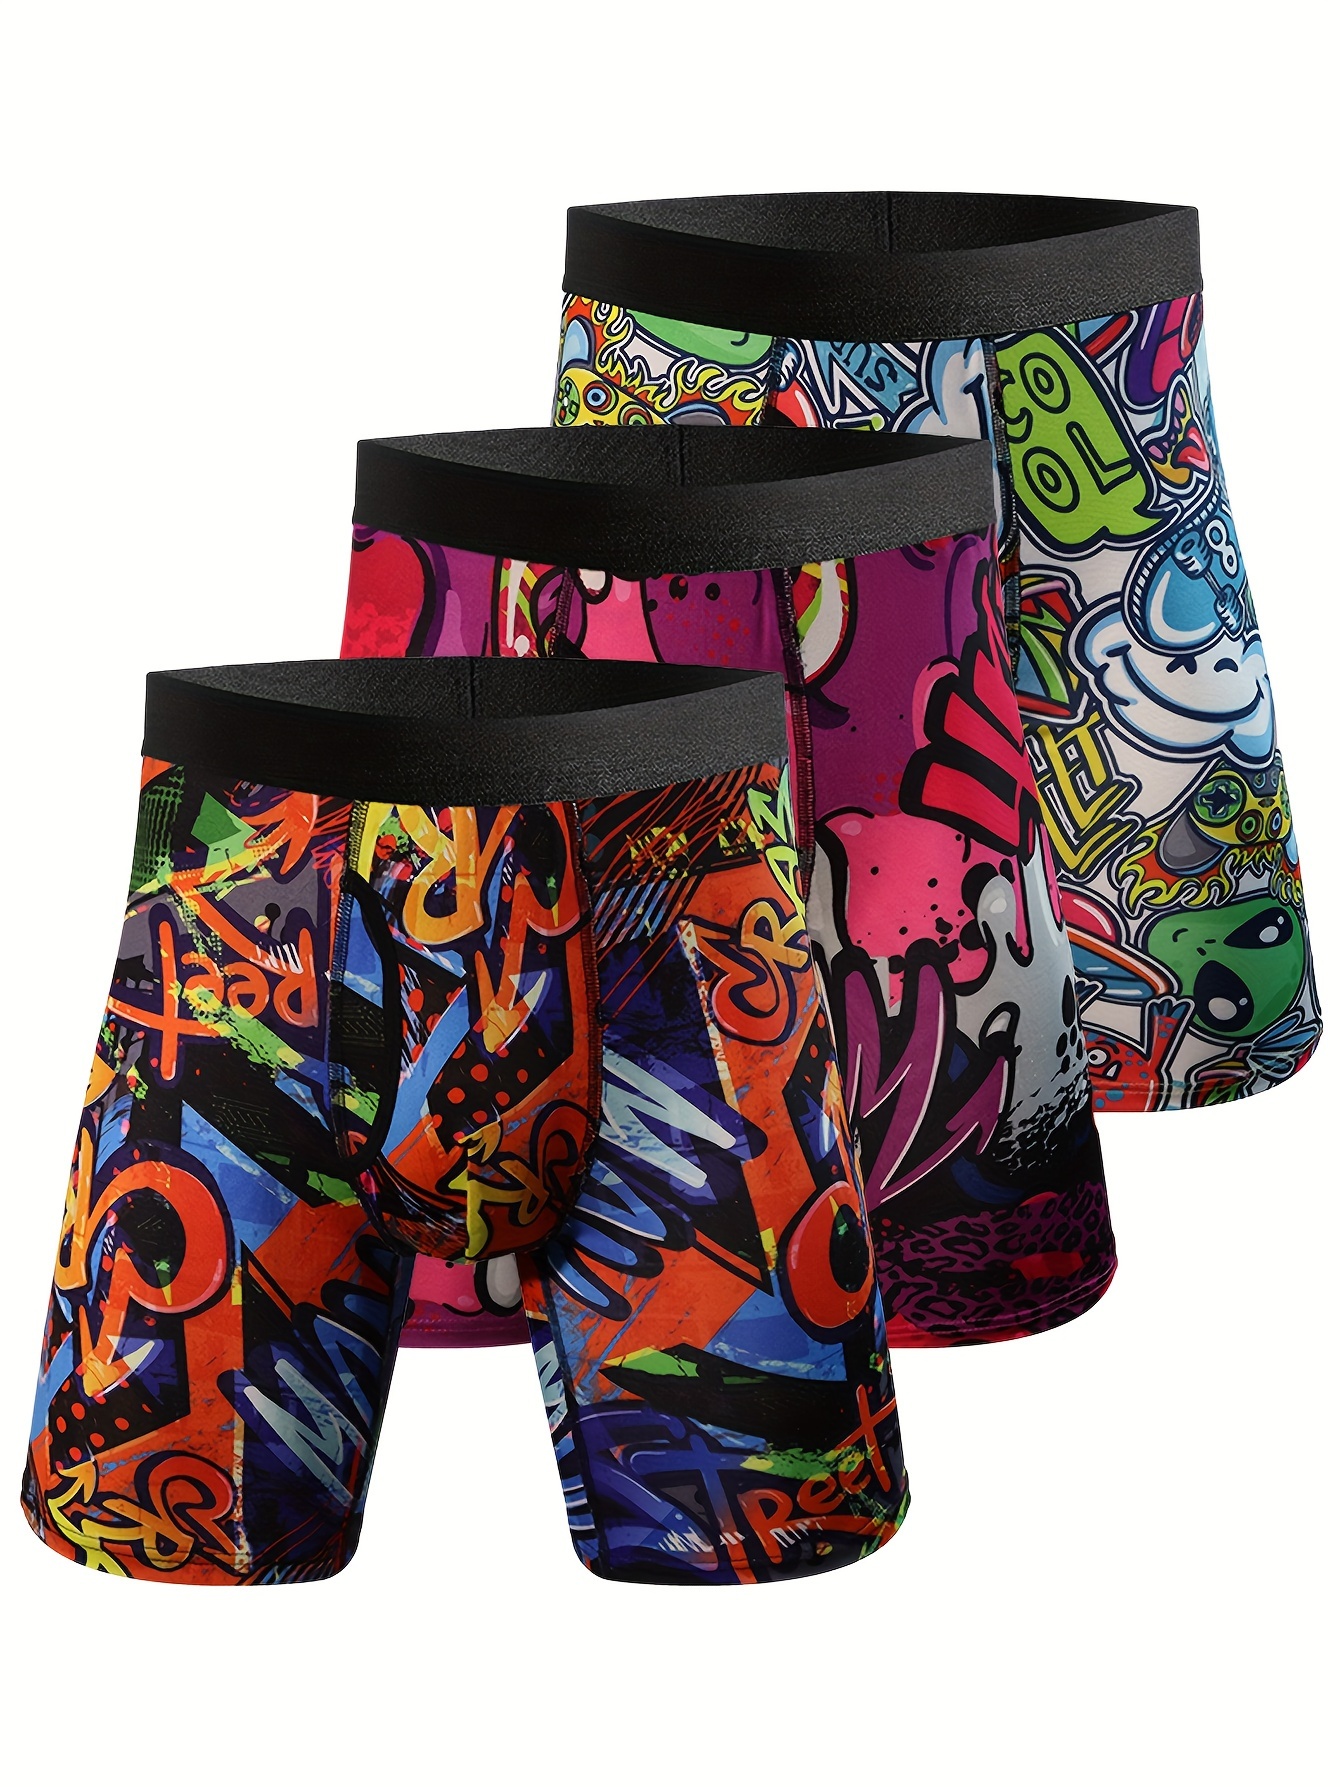 WAY TO CELEBRATE! Boxers Shorts Elastic Waistband Super Soft Hearts Printed  Valentine's Day Underpants (Men's or Men's Big & Tall) 1 Pack